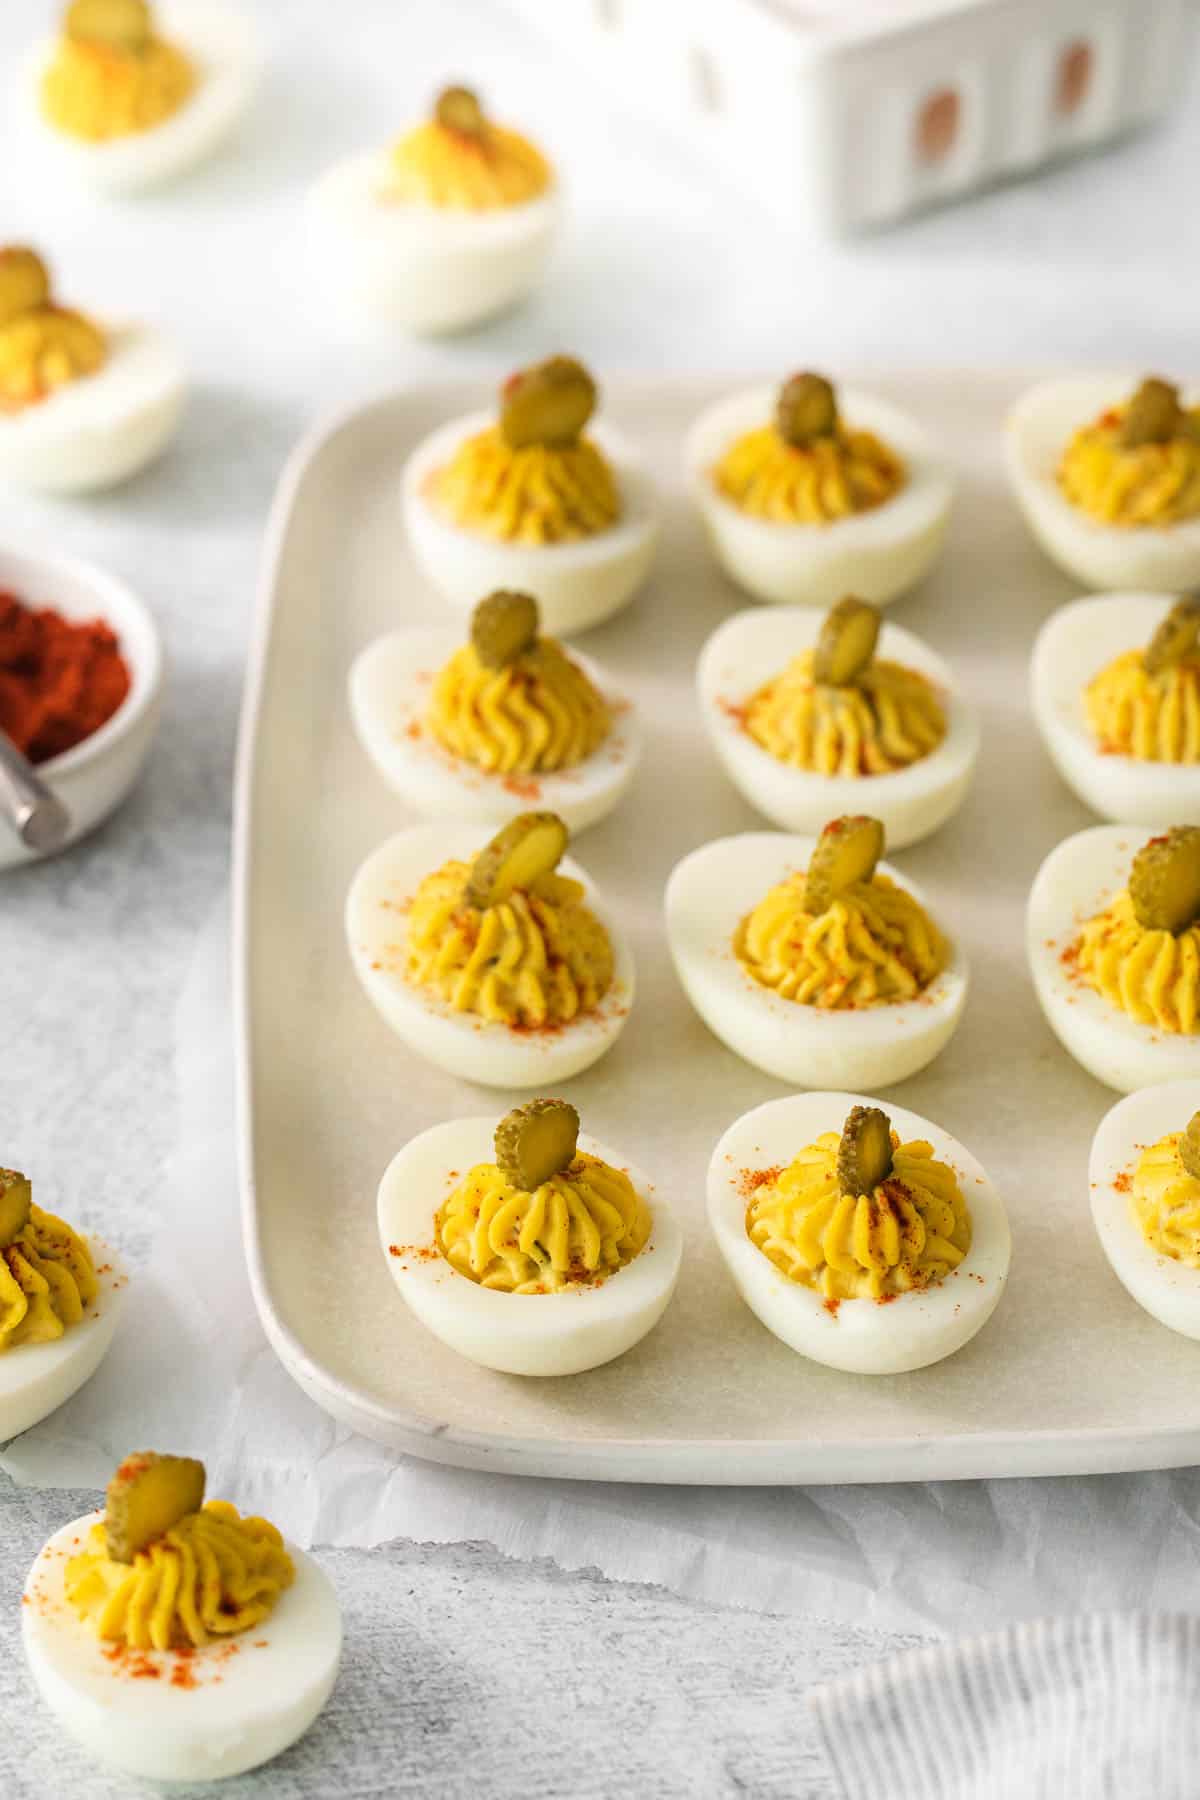 Deviled eggs with relish on a tray